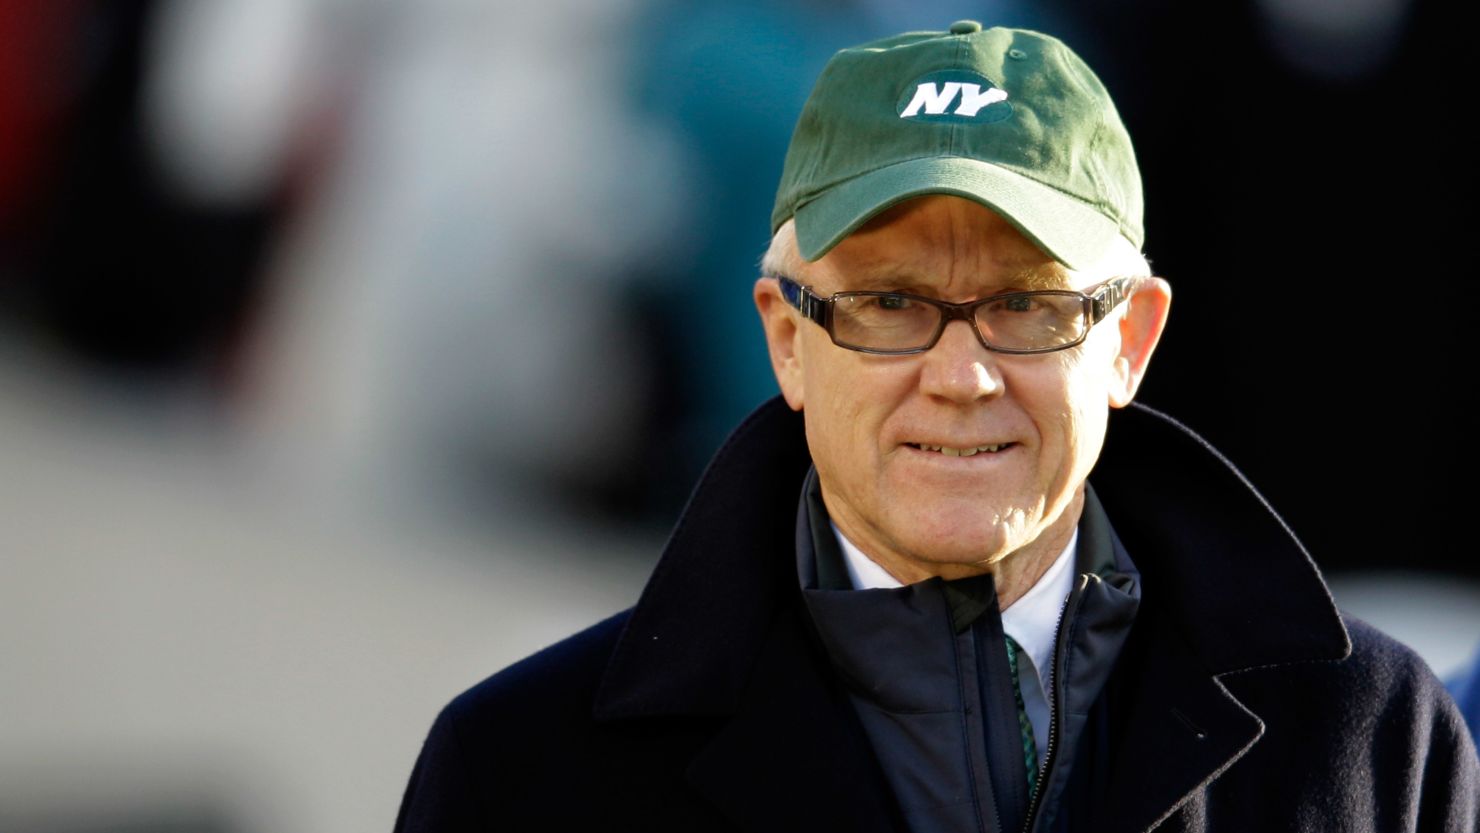 New York Jets owner Robert Wood "Woody" Johnson also is New York chairman of Mitt Romney's presidential campaign.